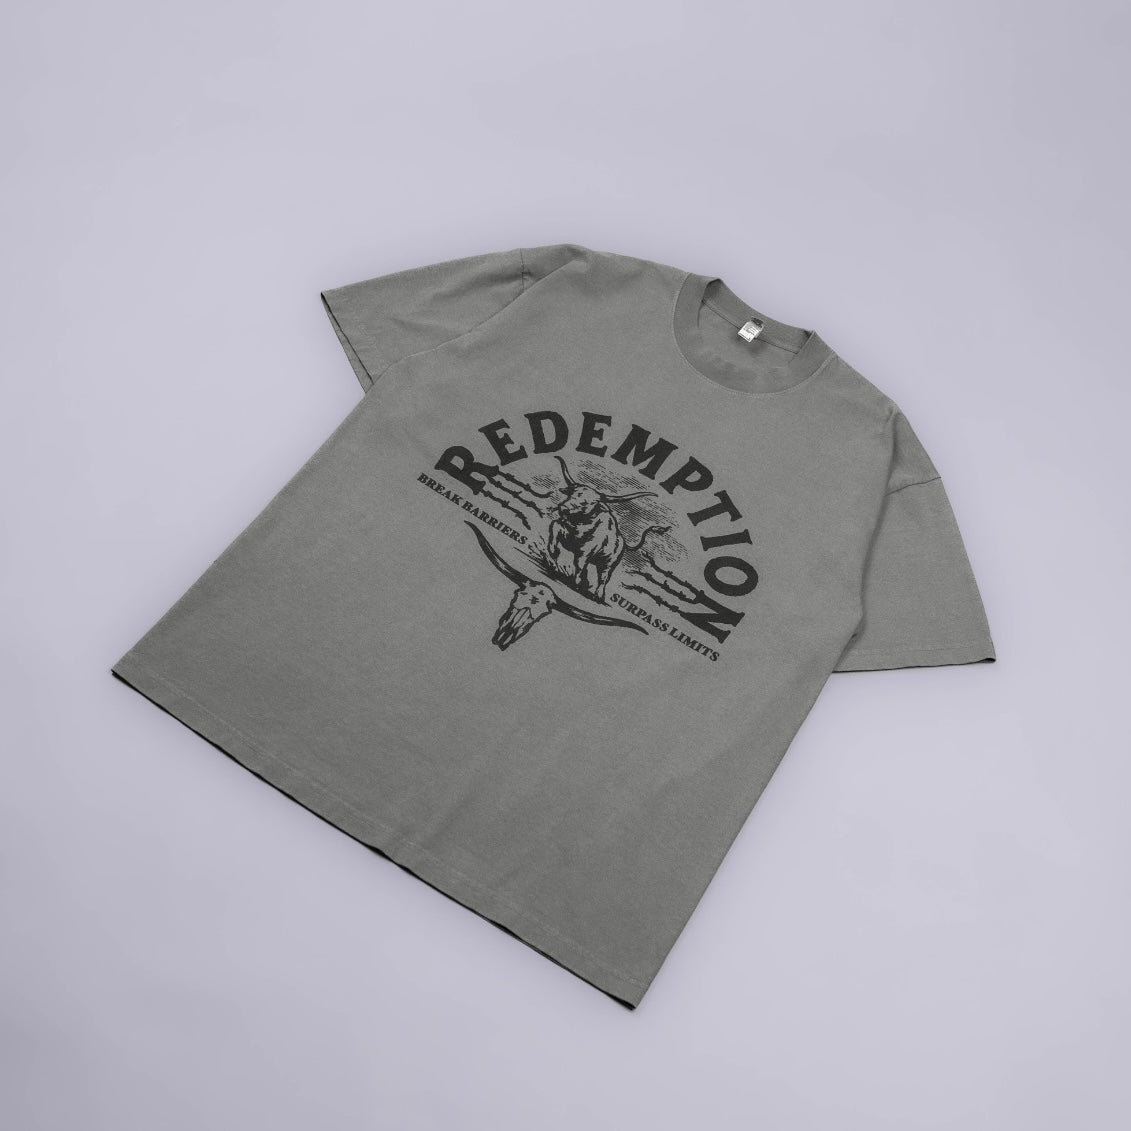 Unbound Oversized Tee in Charcoal